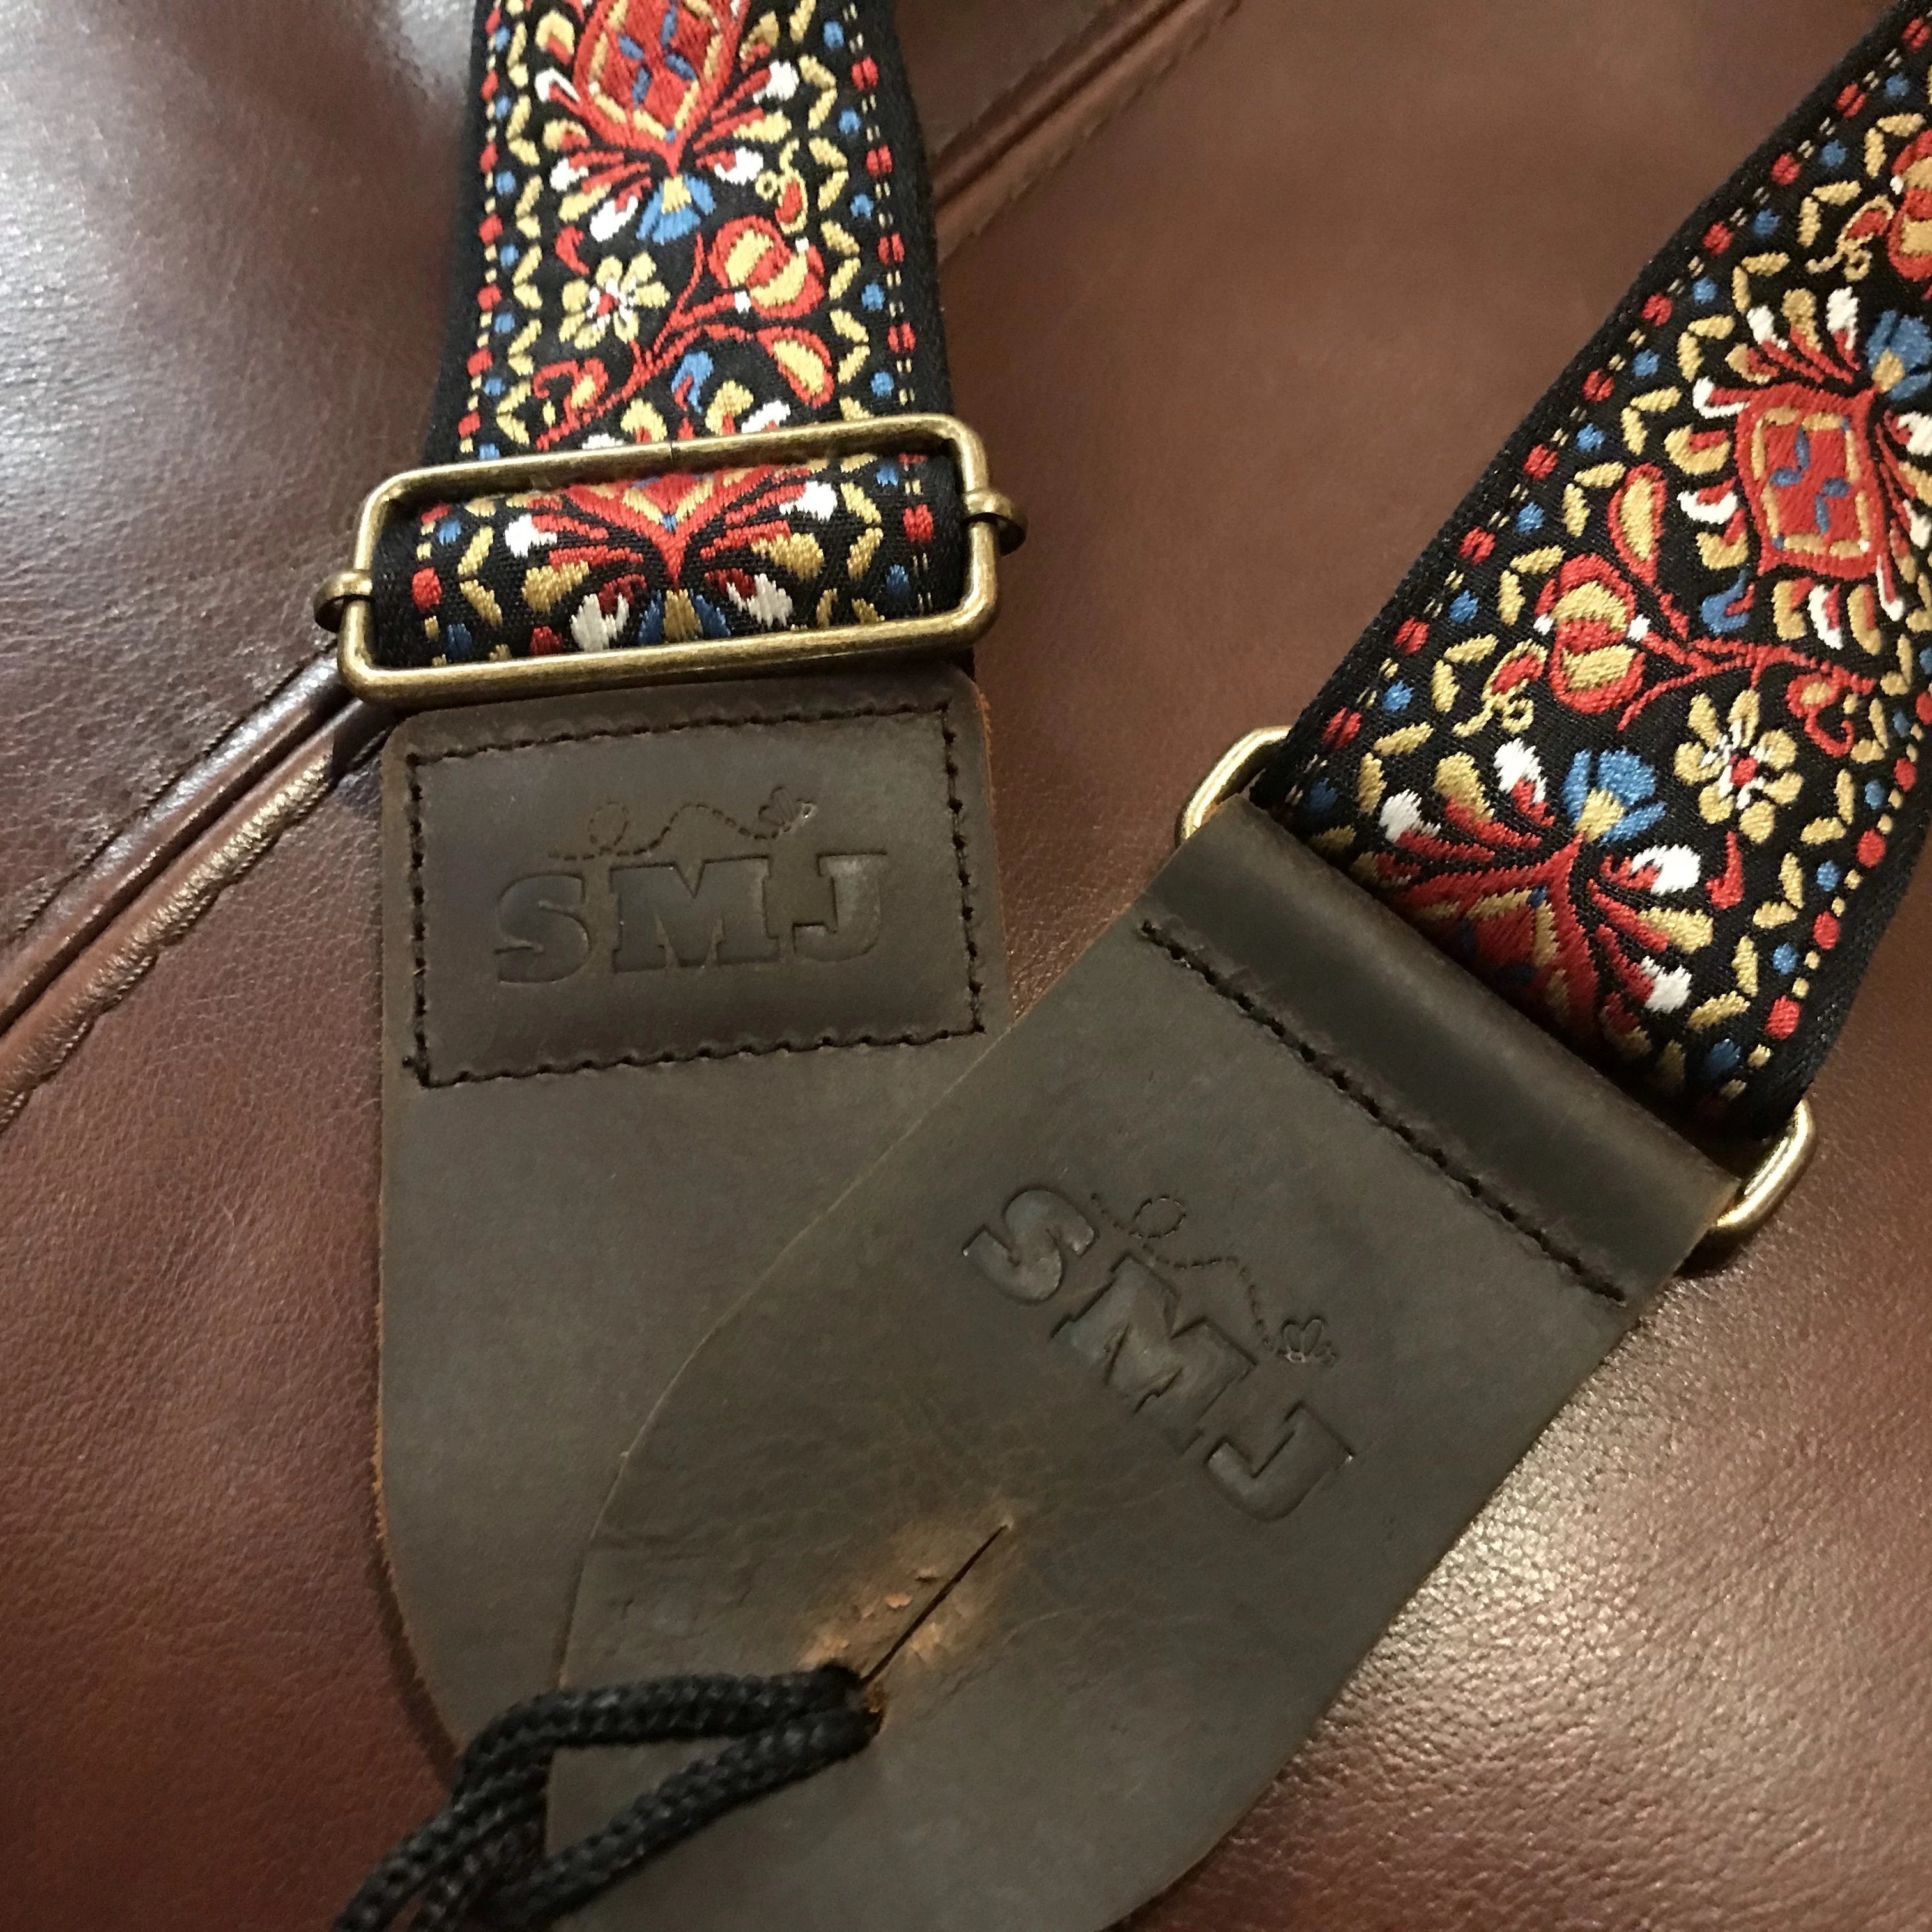 SMJ Reserve Collection "Peacock" Guitar Strap, Accessory for sale at Richards Guitars.